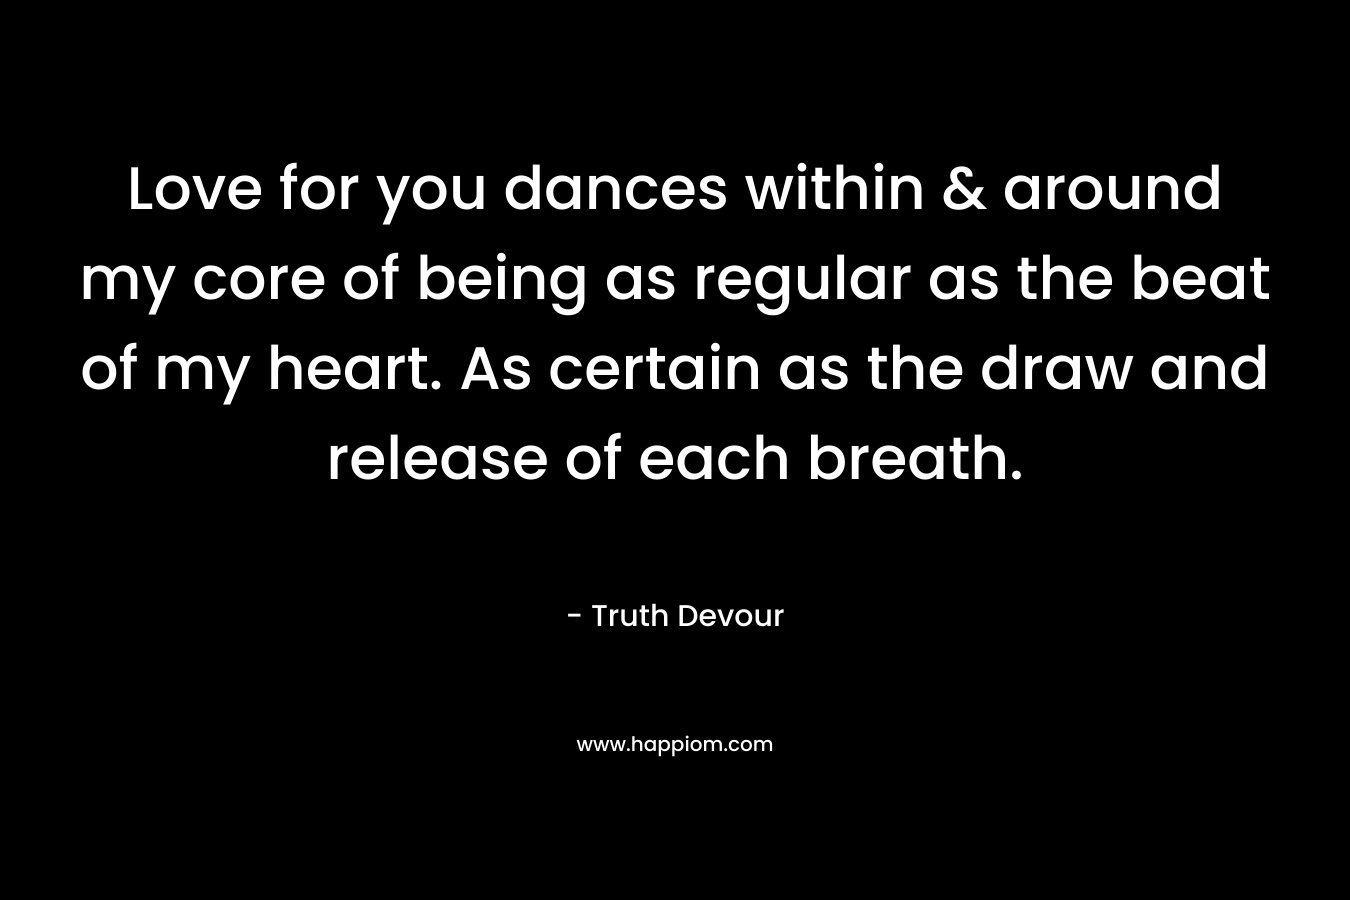 Love for you dances within & around my core of being as regular as the beat of my heart. As certain as the draw and release of each breath. – Truth Devour